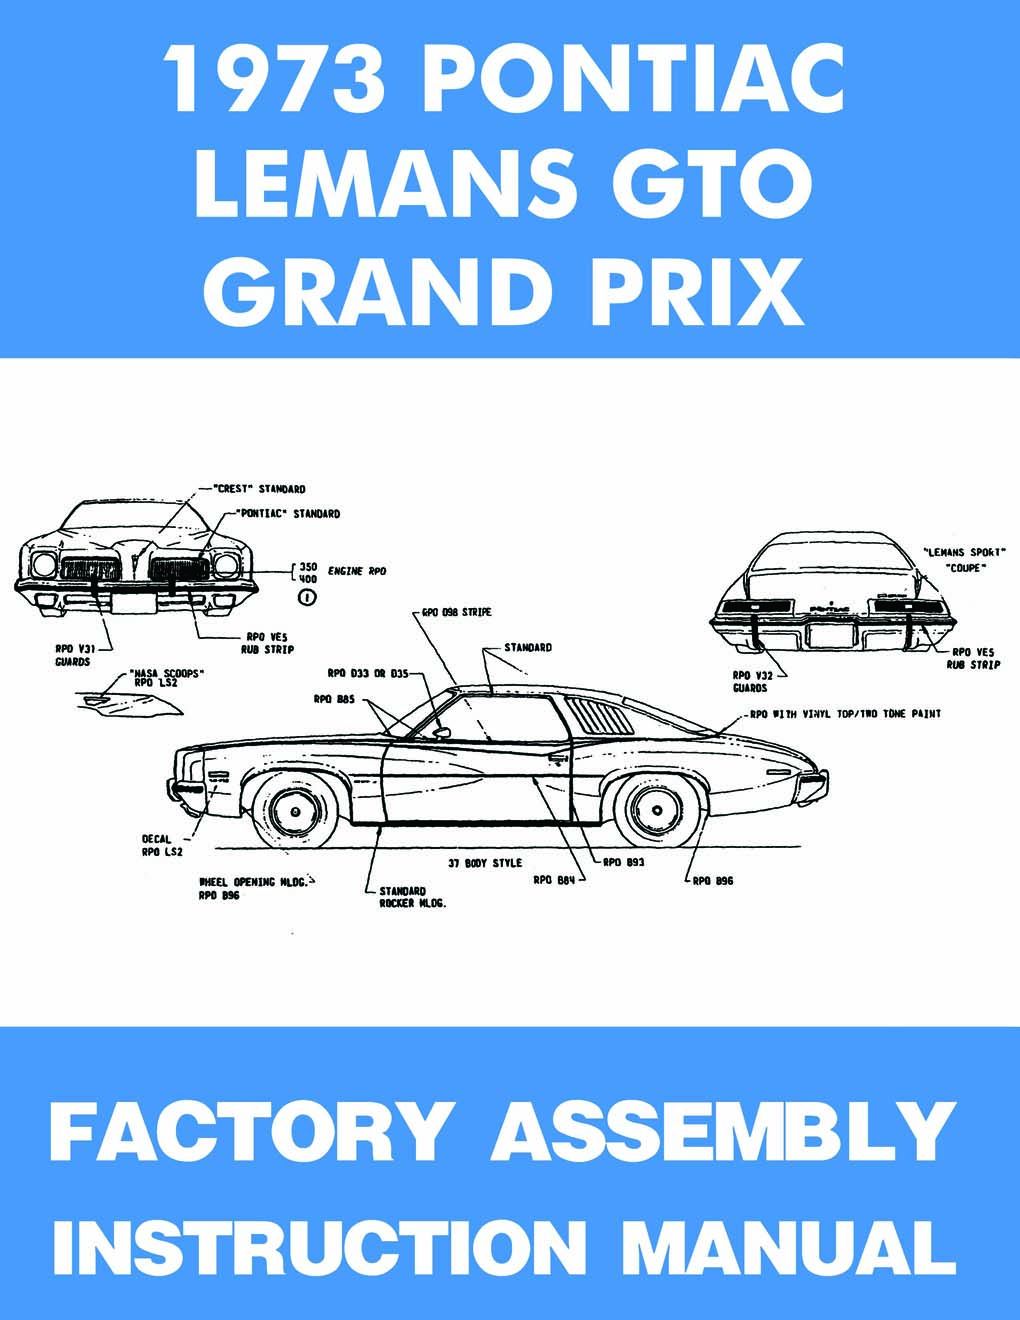 american-autowire, Factory Assembly Manual - 1973 Lemans/GTO